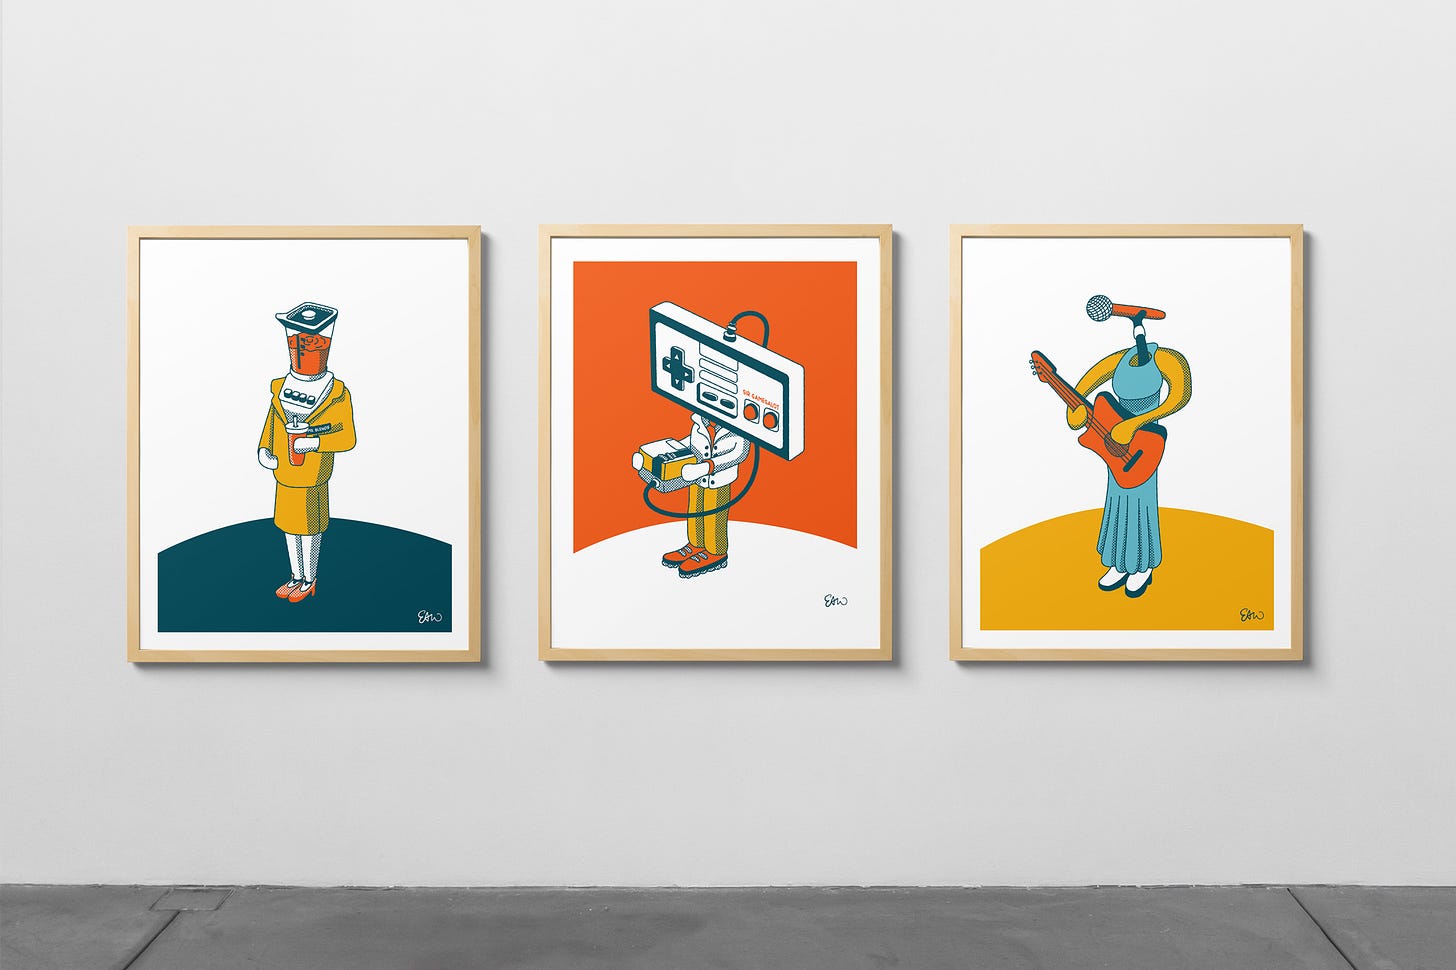 A gallery mockup of three illustrations on a white wall, each depicting a character with an object replacing their head: a blender, a game controller, and a microphone. 